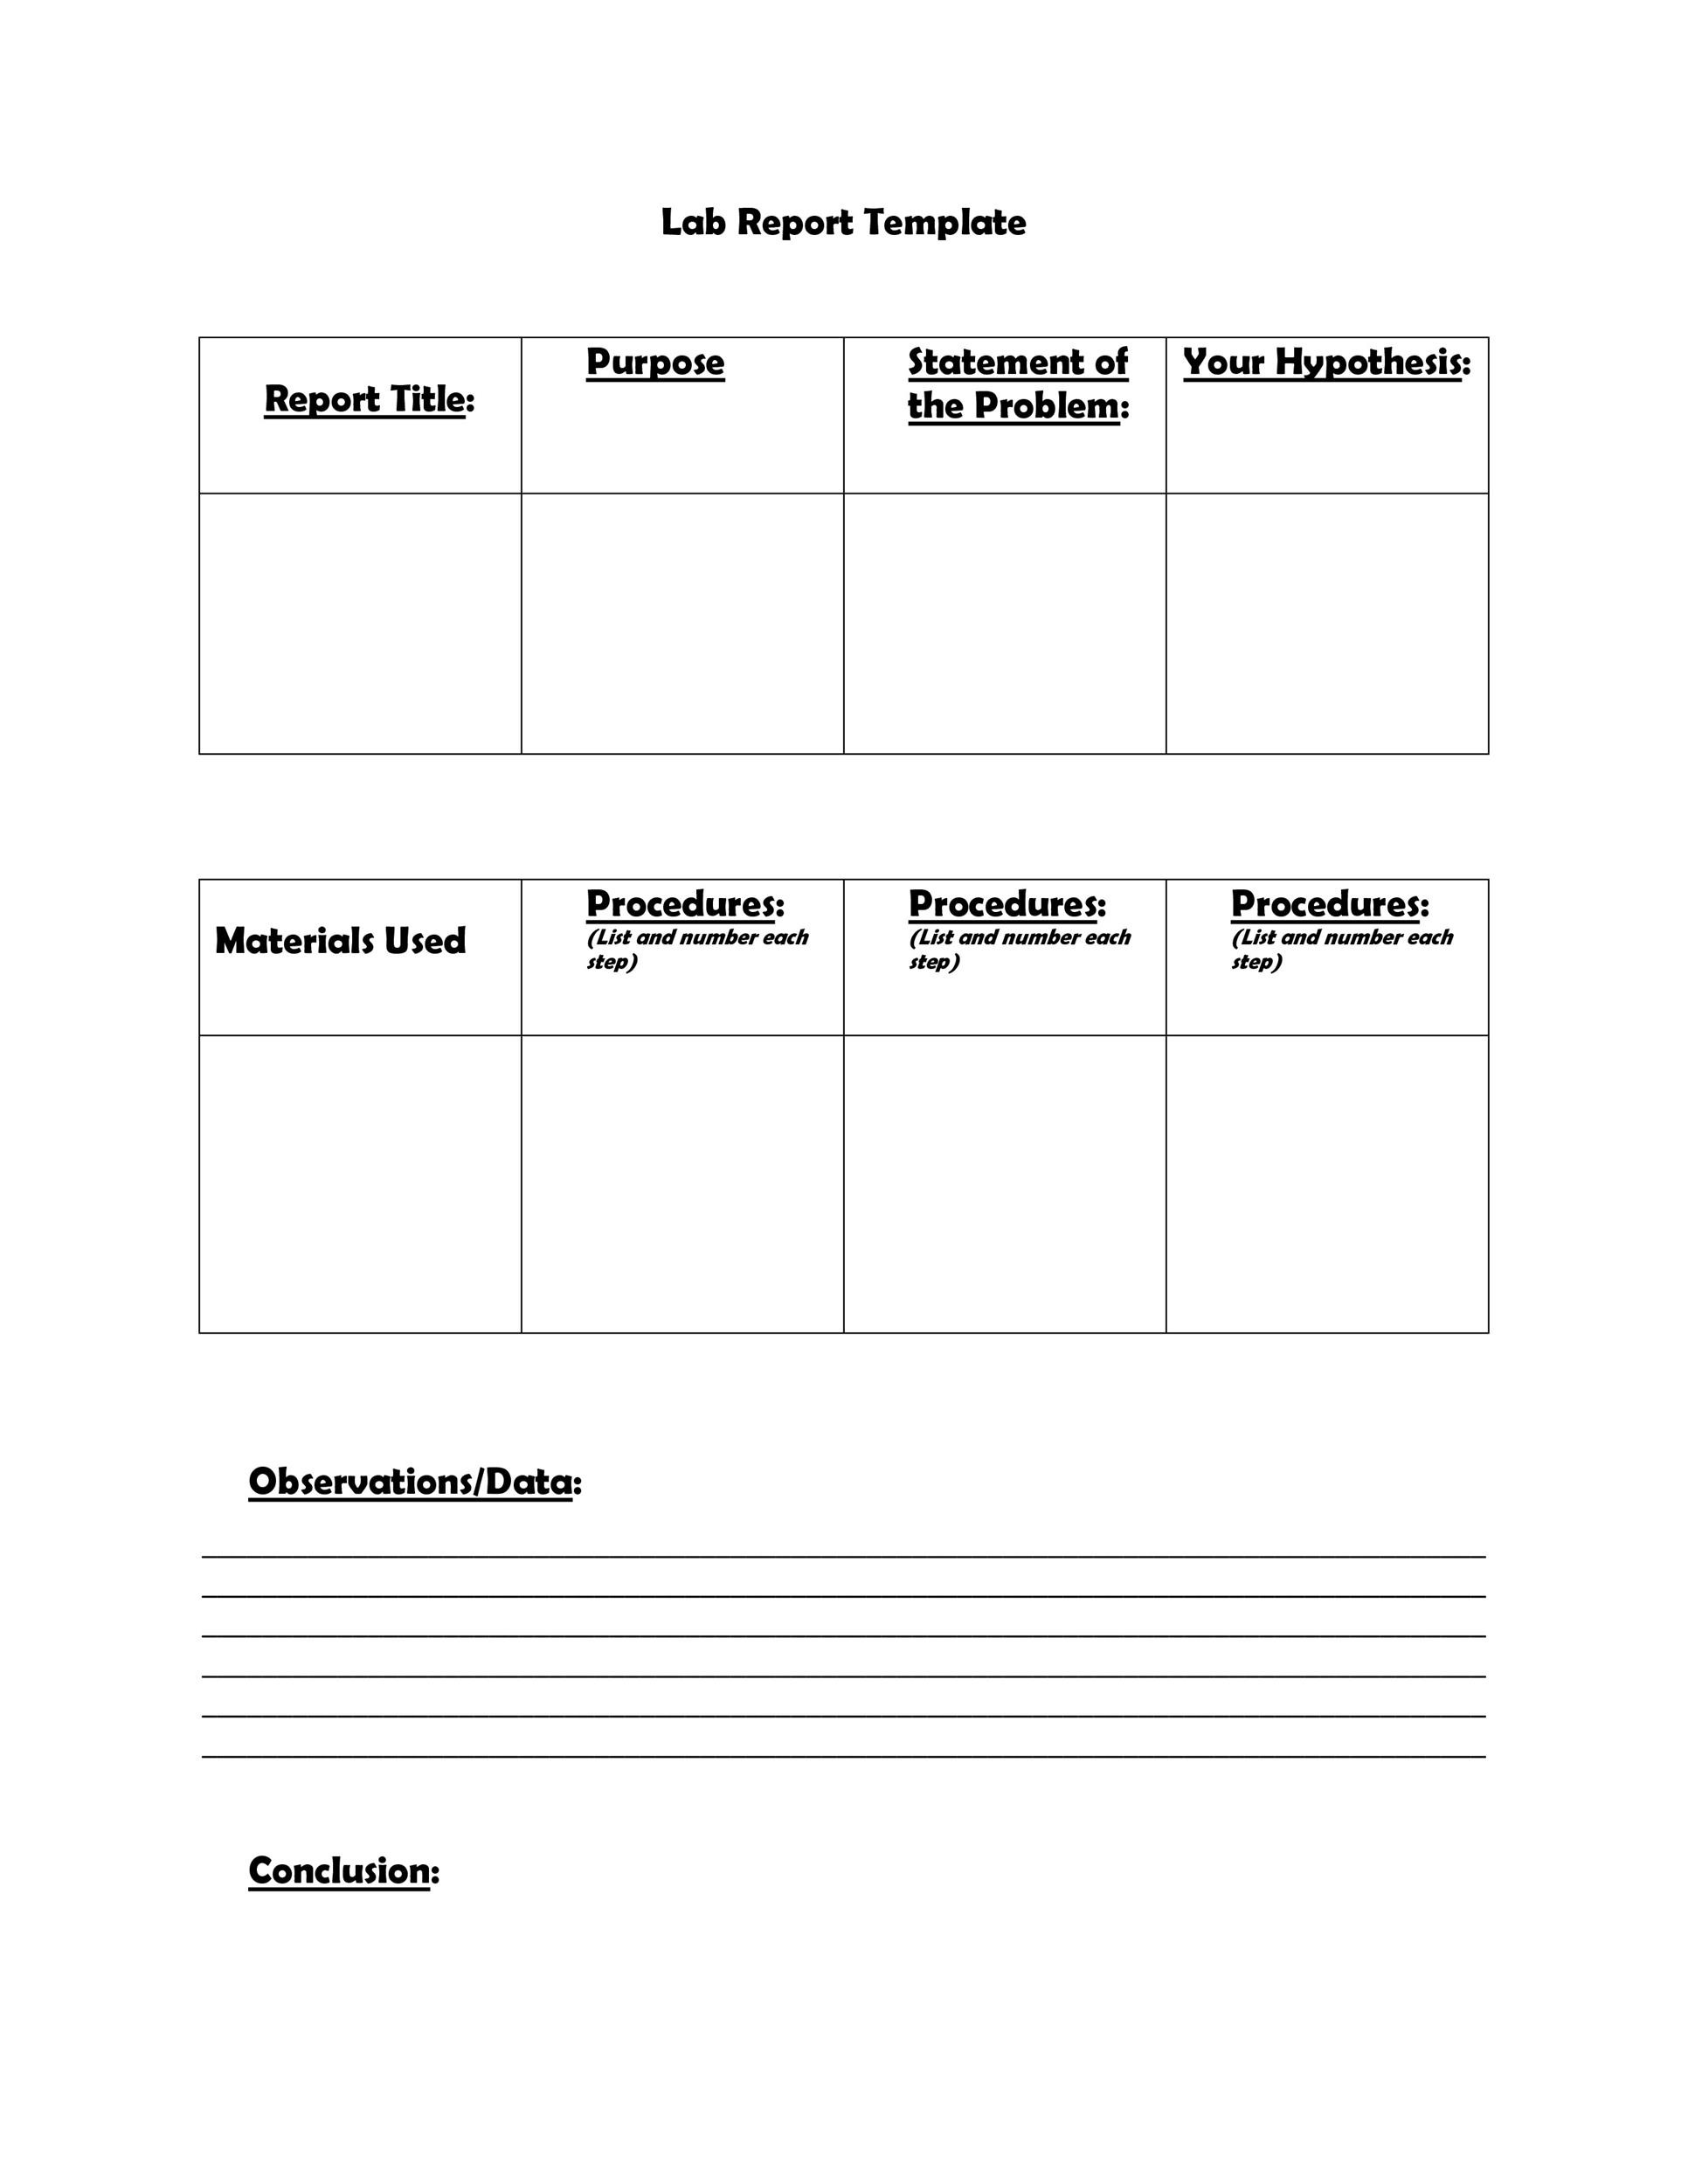 Free lab report template 39